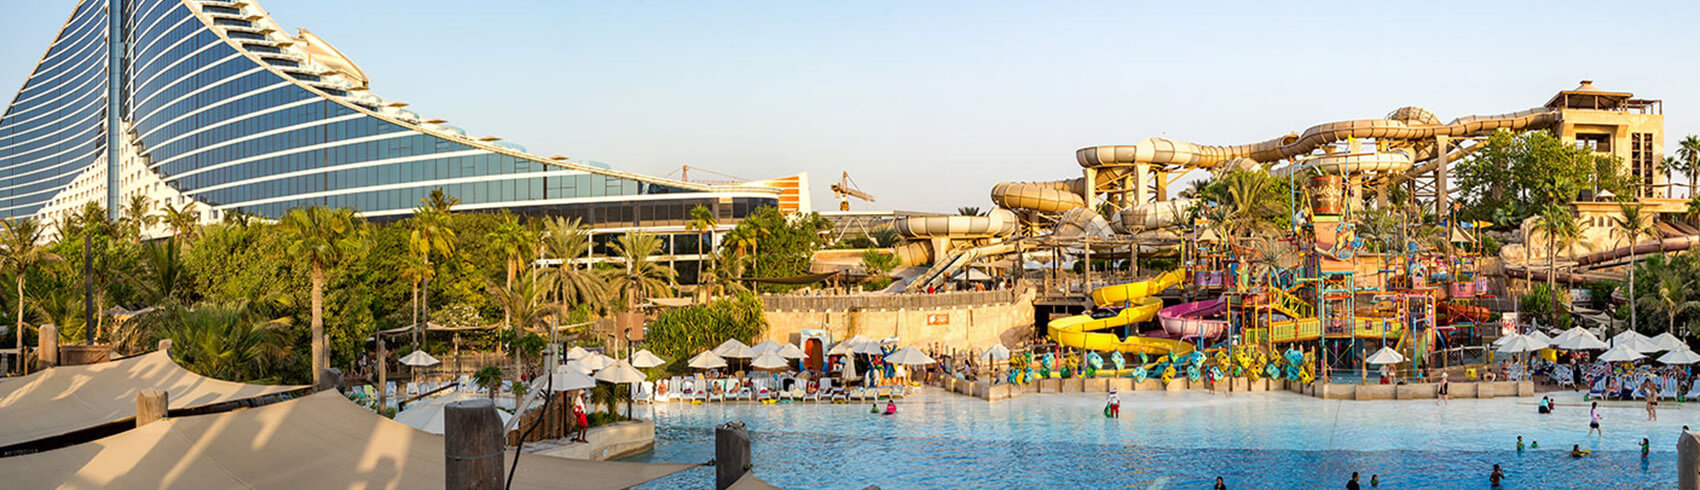 Theme Parks and Water Parks in Dubai